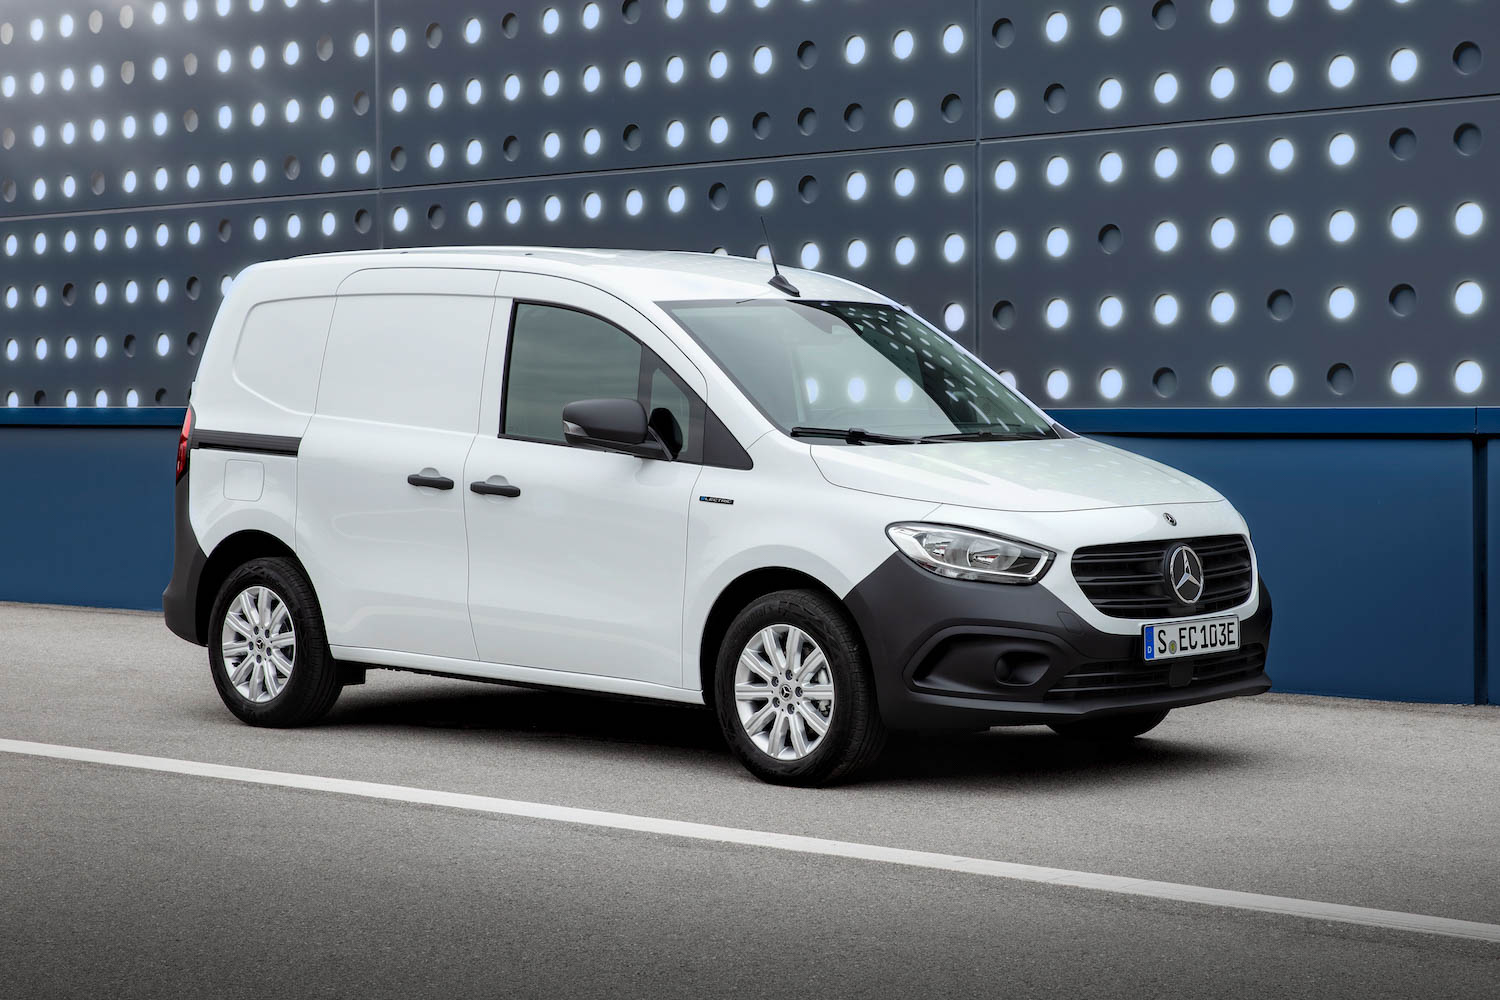 New Mercedes Citan arrives in May